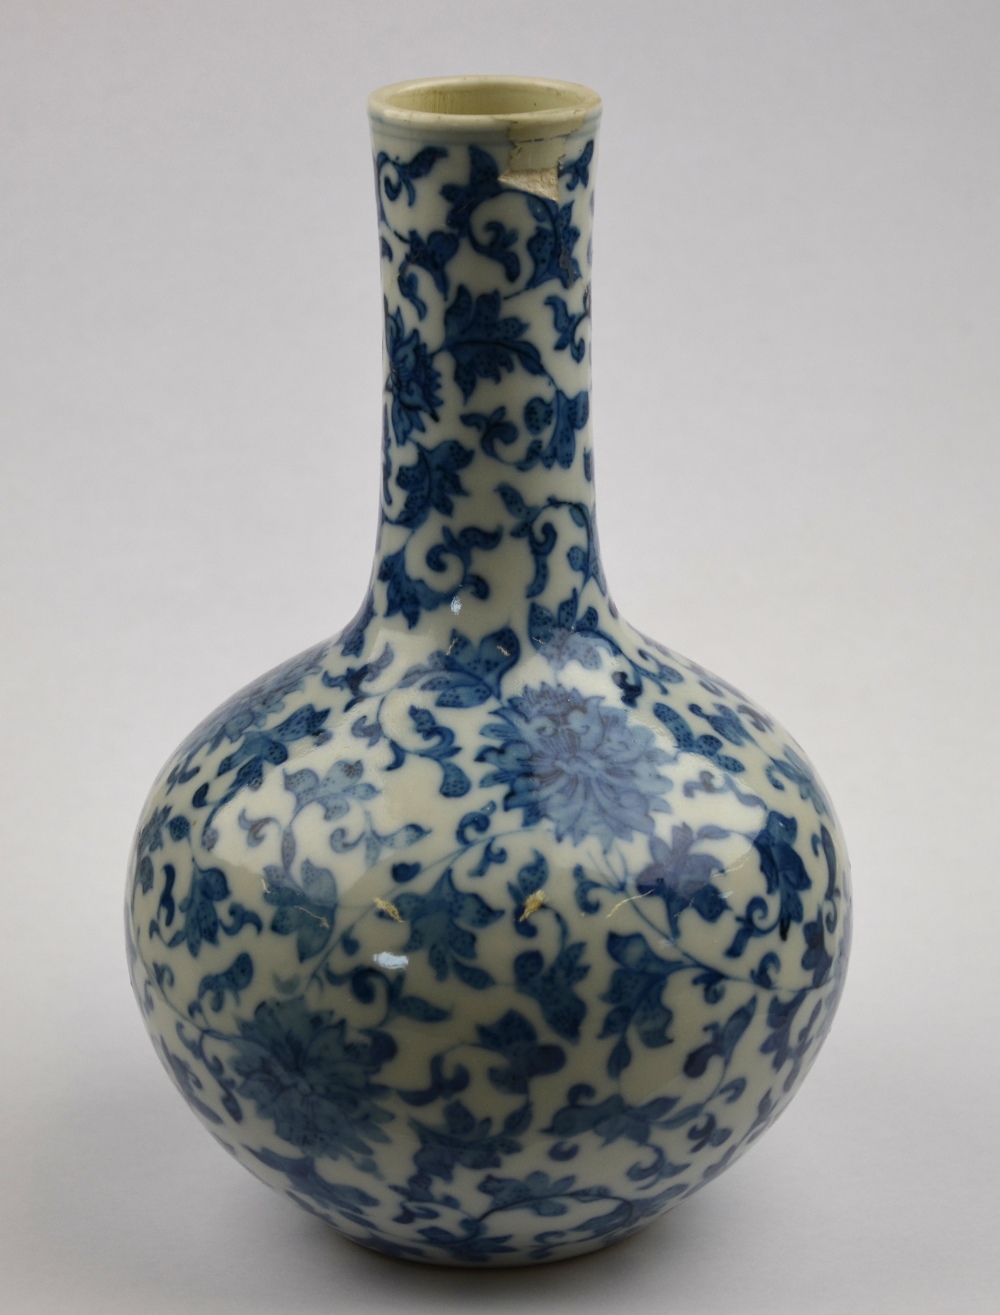 A Chinese blue and white bottle vase decorated with flowers and foliage, Yongzhing seal mark but